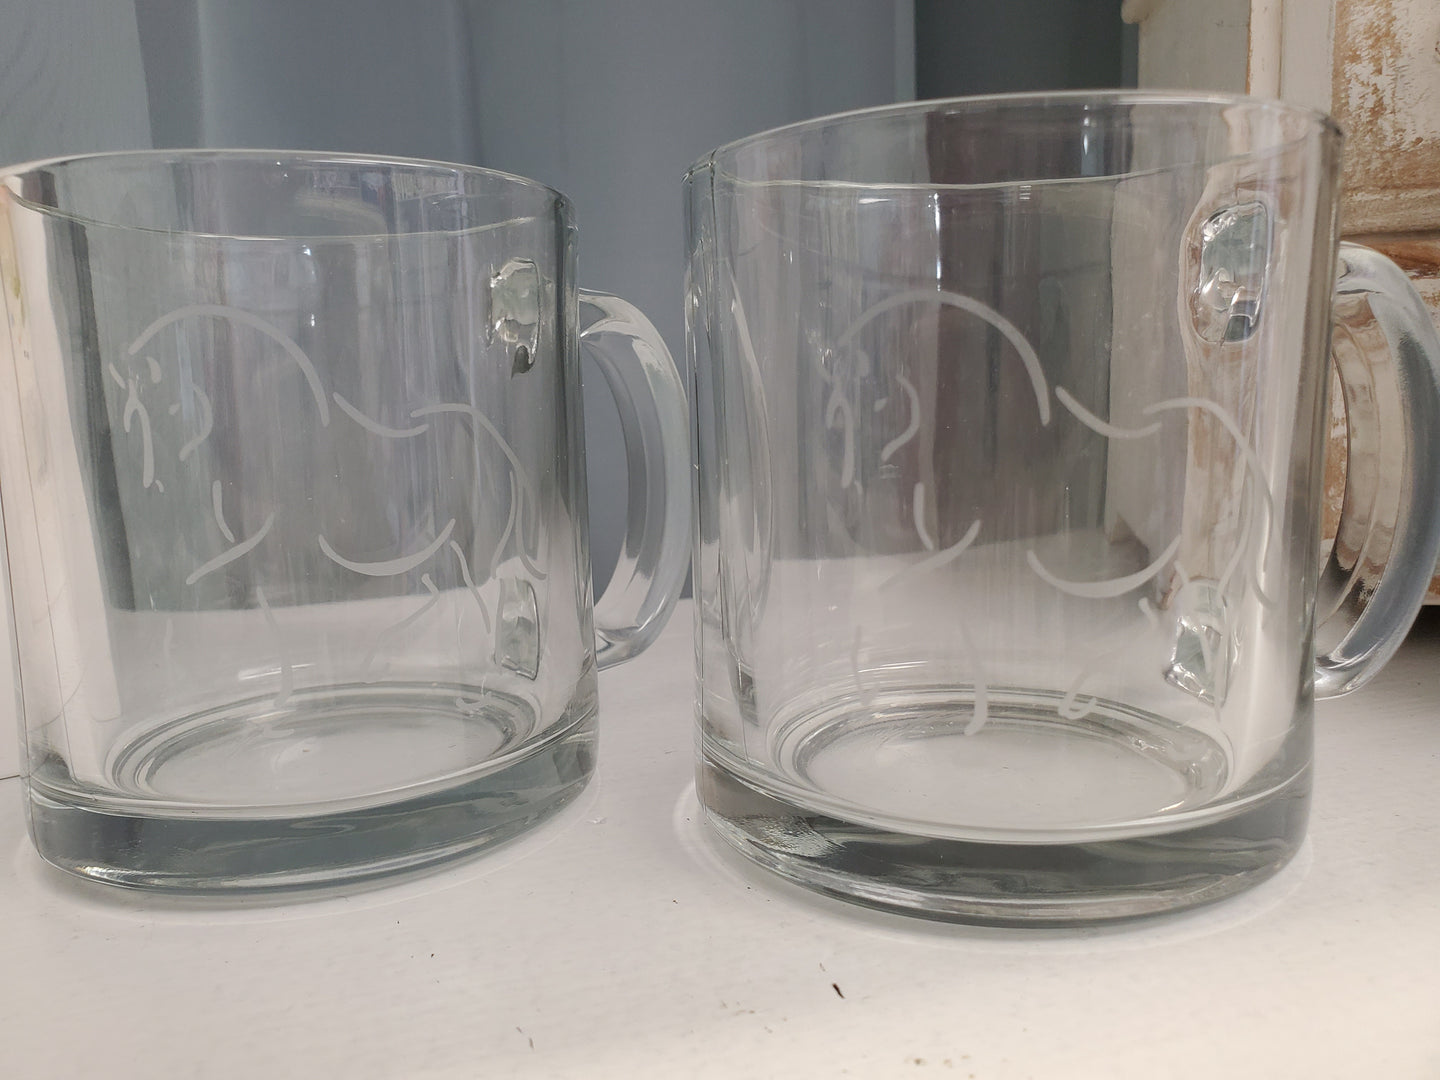 Equestrian Etched Glass Coffee Mugs